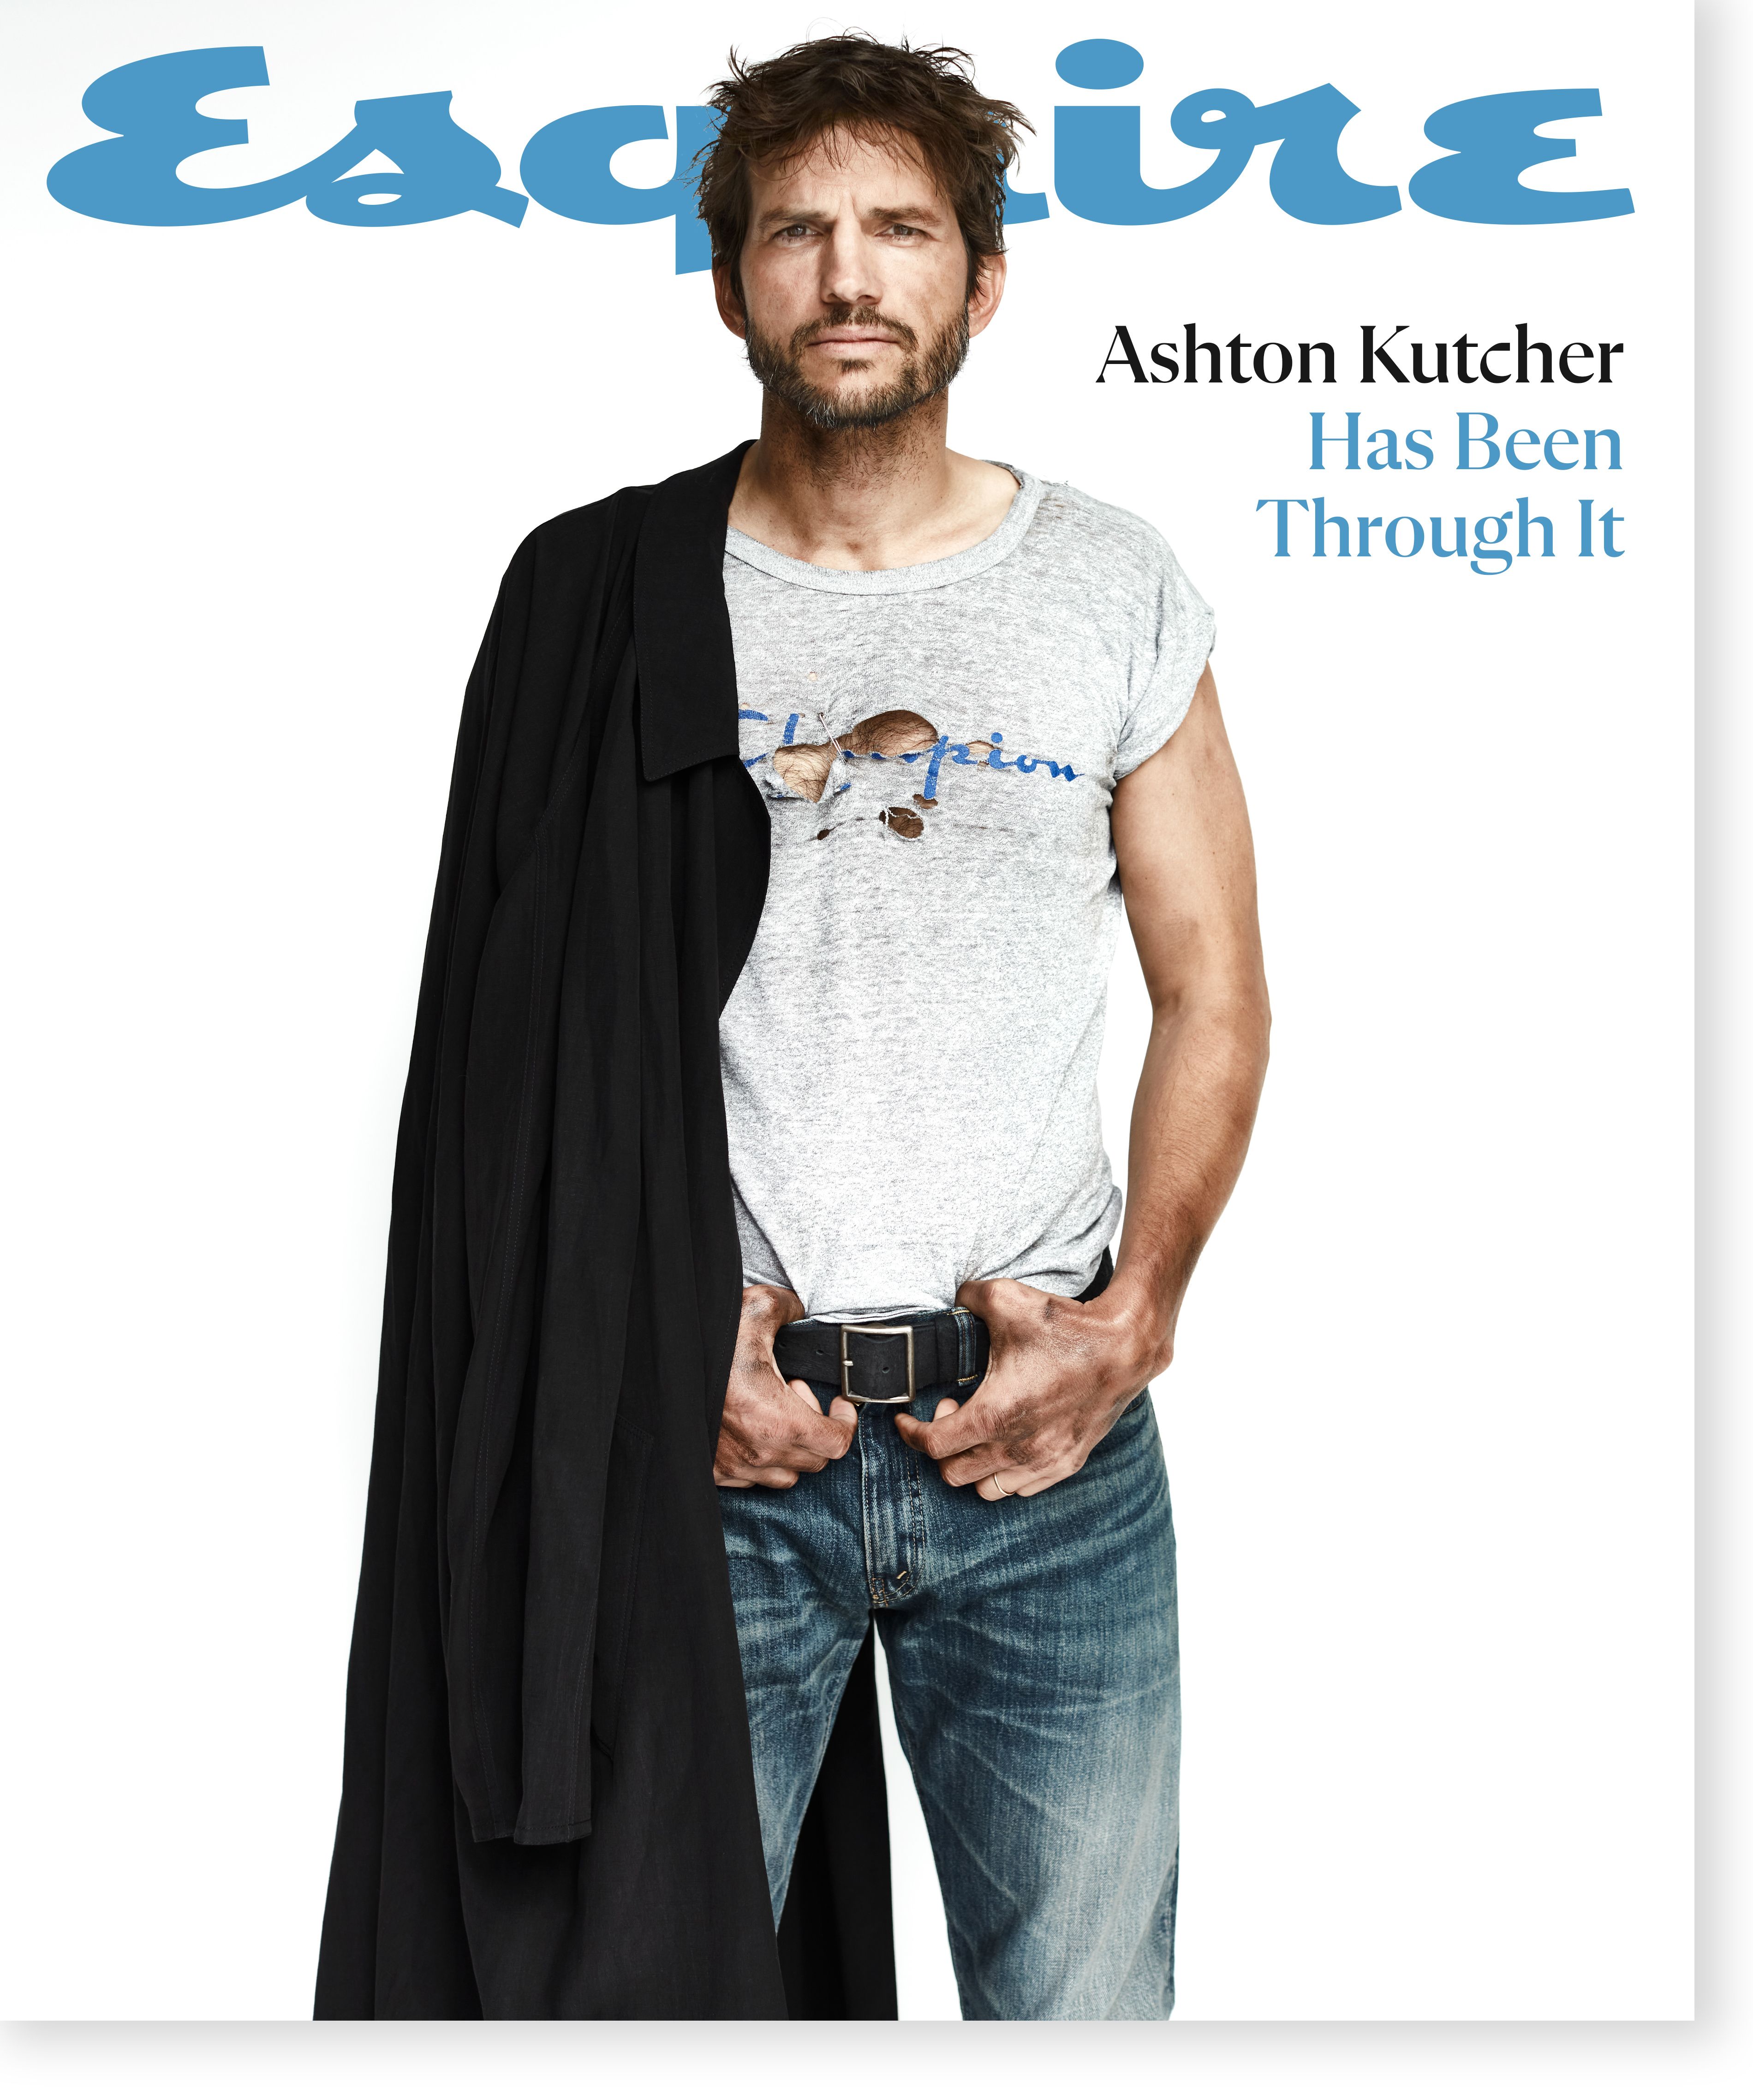 Ashton Out In Public Porn - Ashton Kutcher on Running the NYC Marathon, Mila Kunis, and New Rom-Com  'Your Place or Mine'